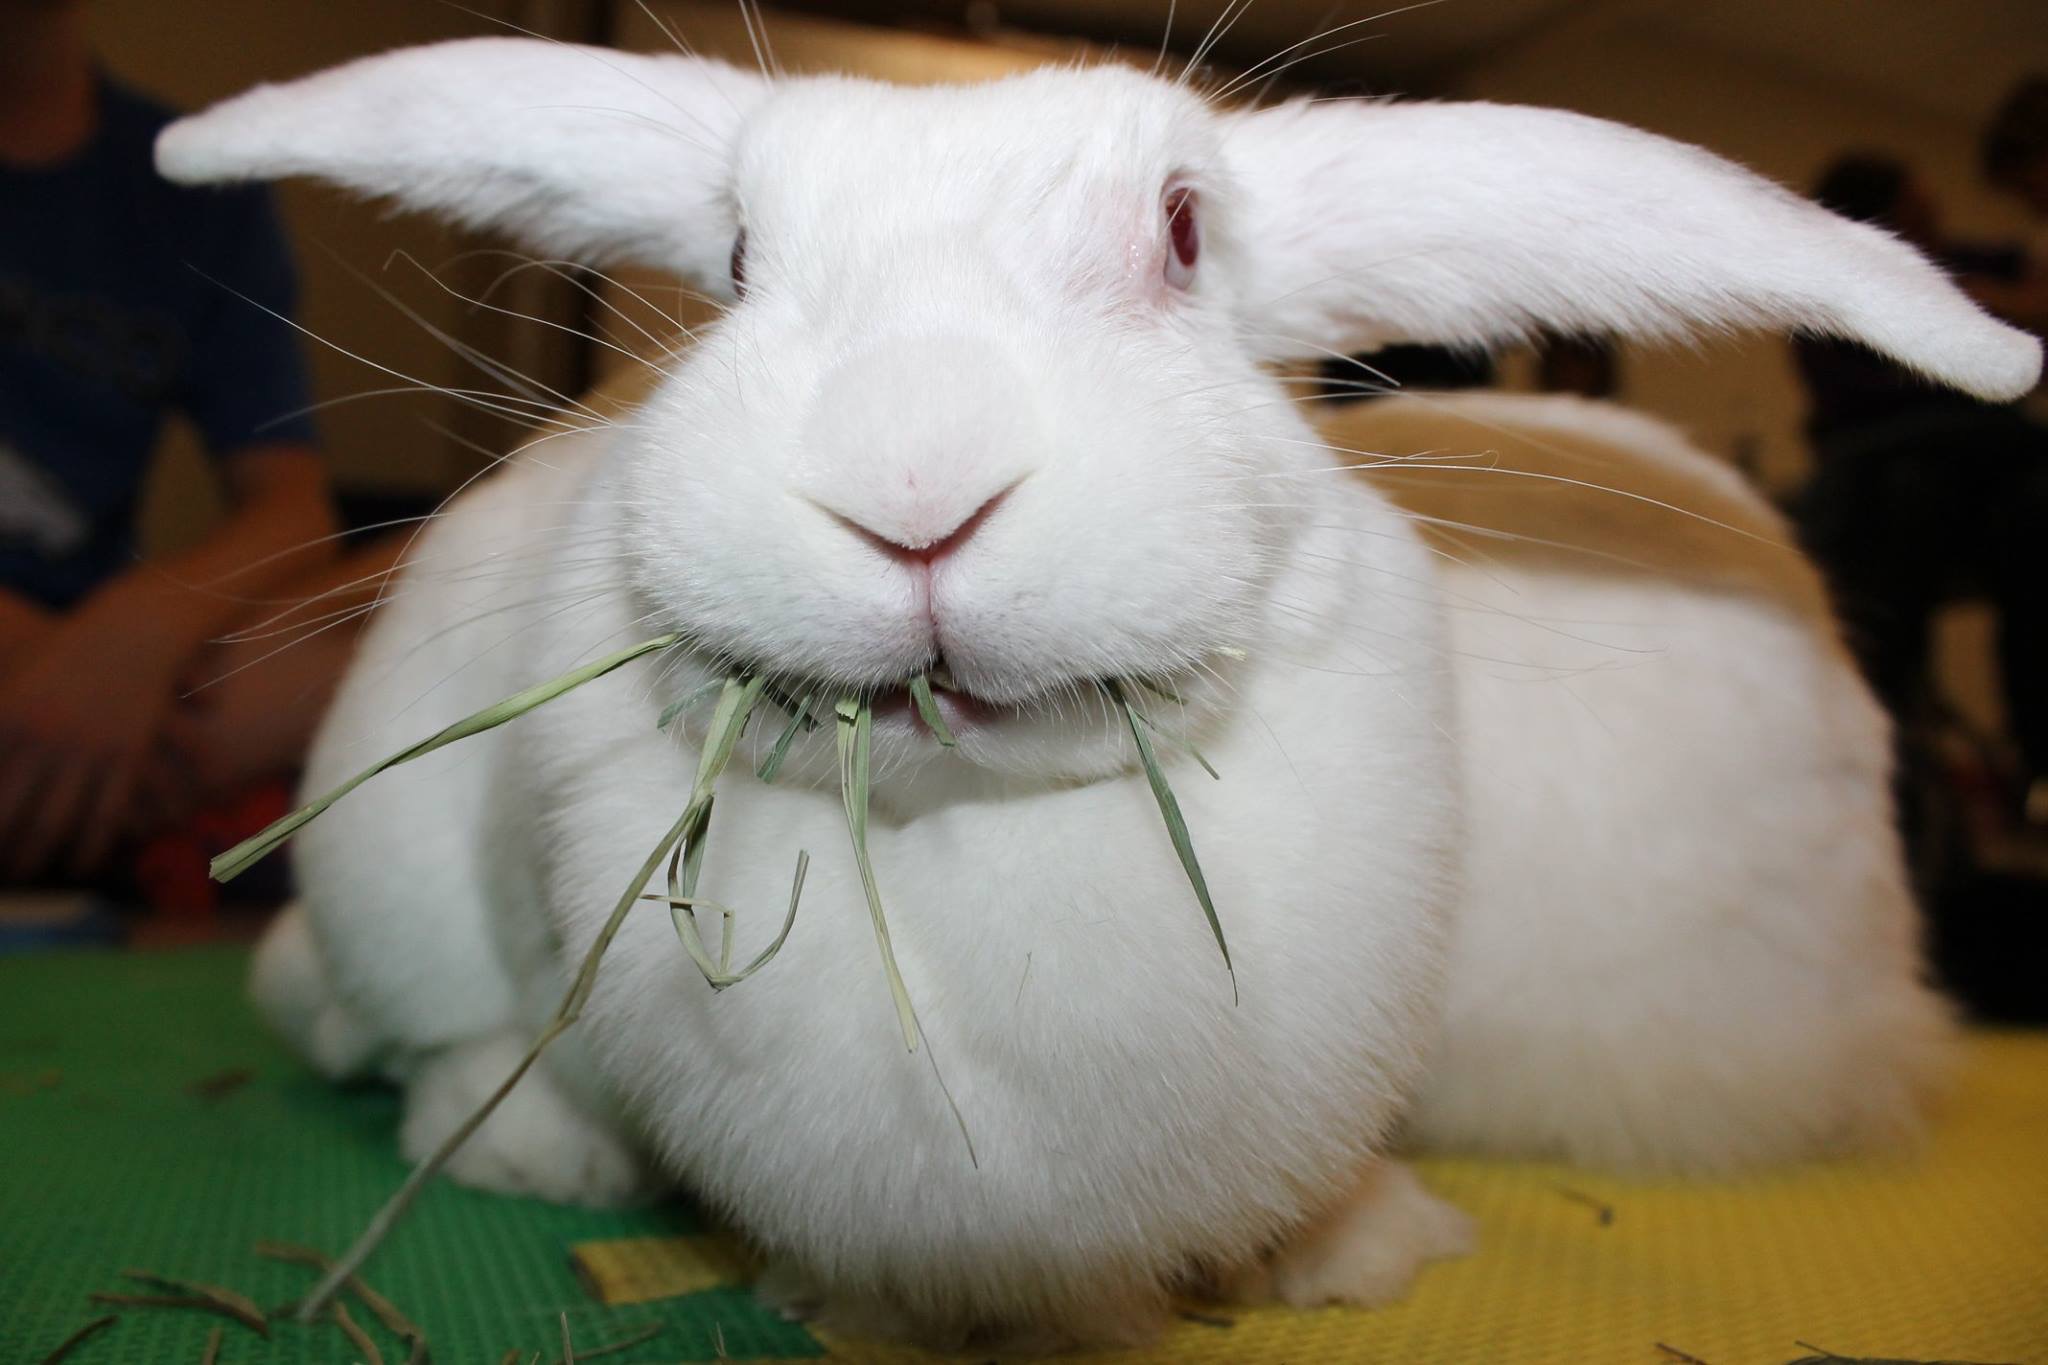 There are many types of hay for rabbits. It should be at least 75% of a rabbit's diet, and the bunny should have an unlimited supply.